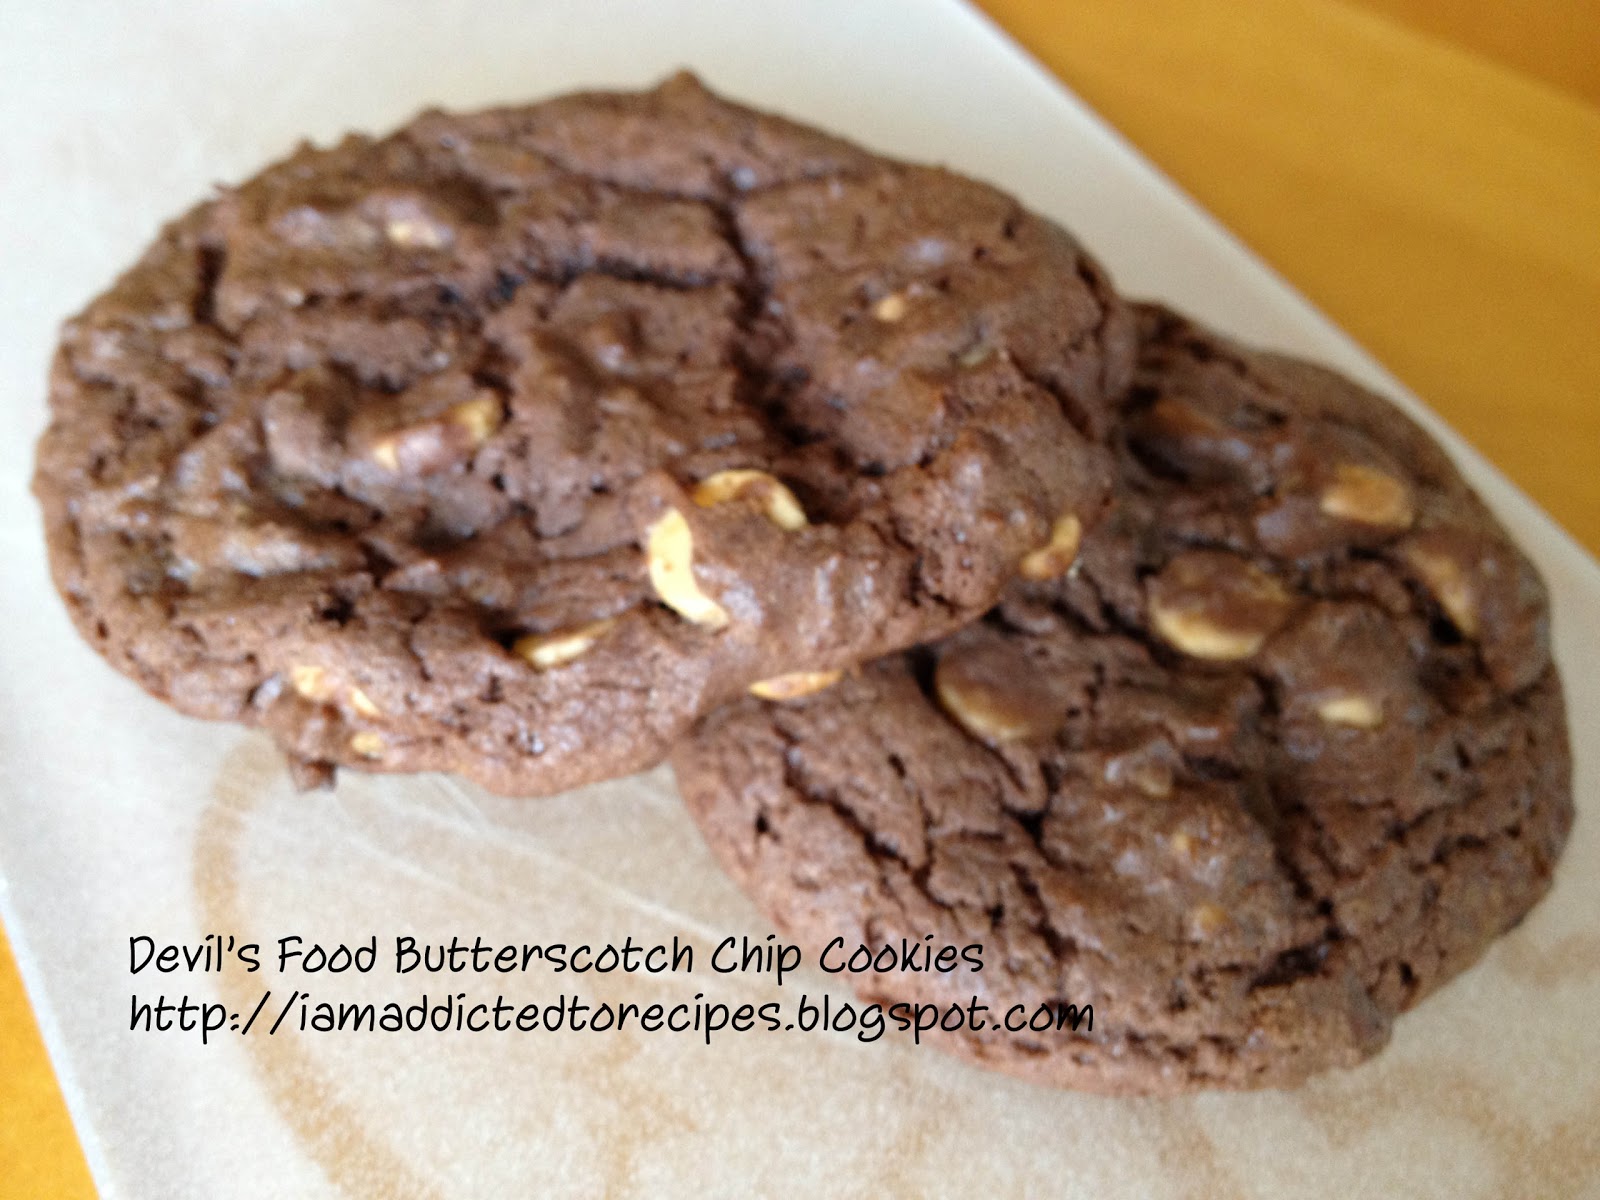 Chocolate Butterscotch Cookies With Cake Mix